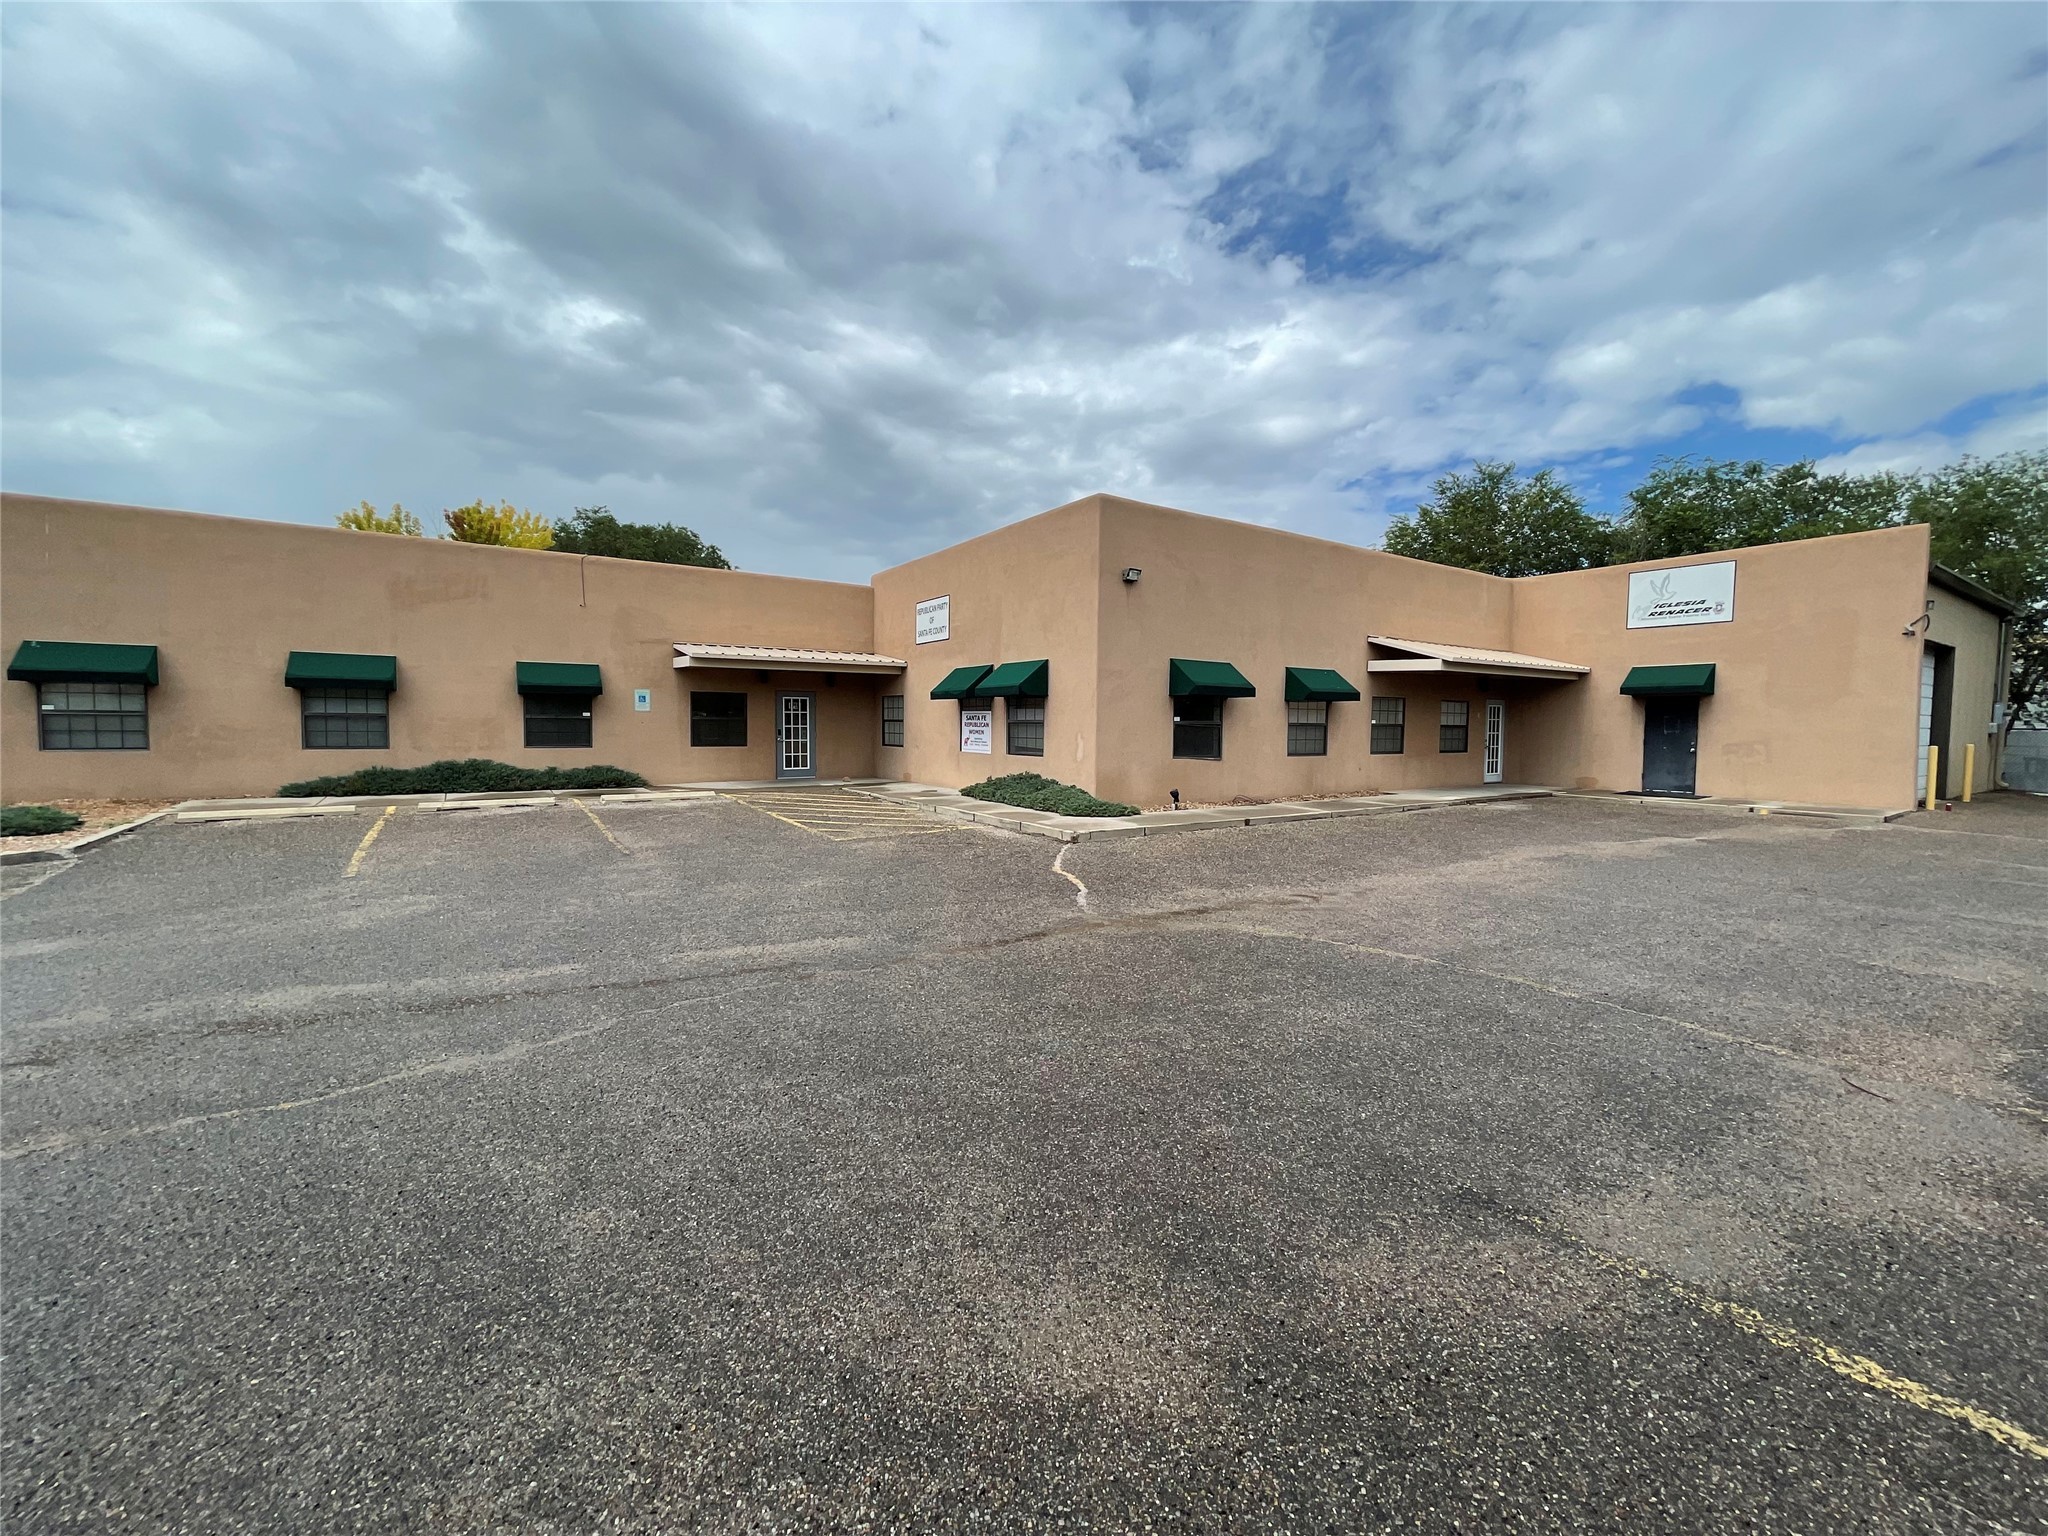 1225 Parkway Unit B, Santa Fe, New Mexico 87507, ,Commercial Lease,For Rent,1225 Parkway Unit B,202232817